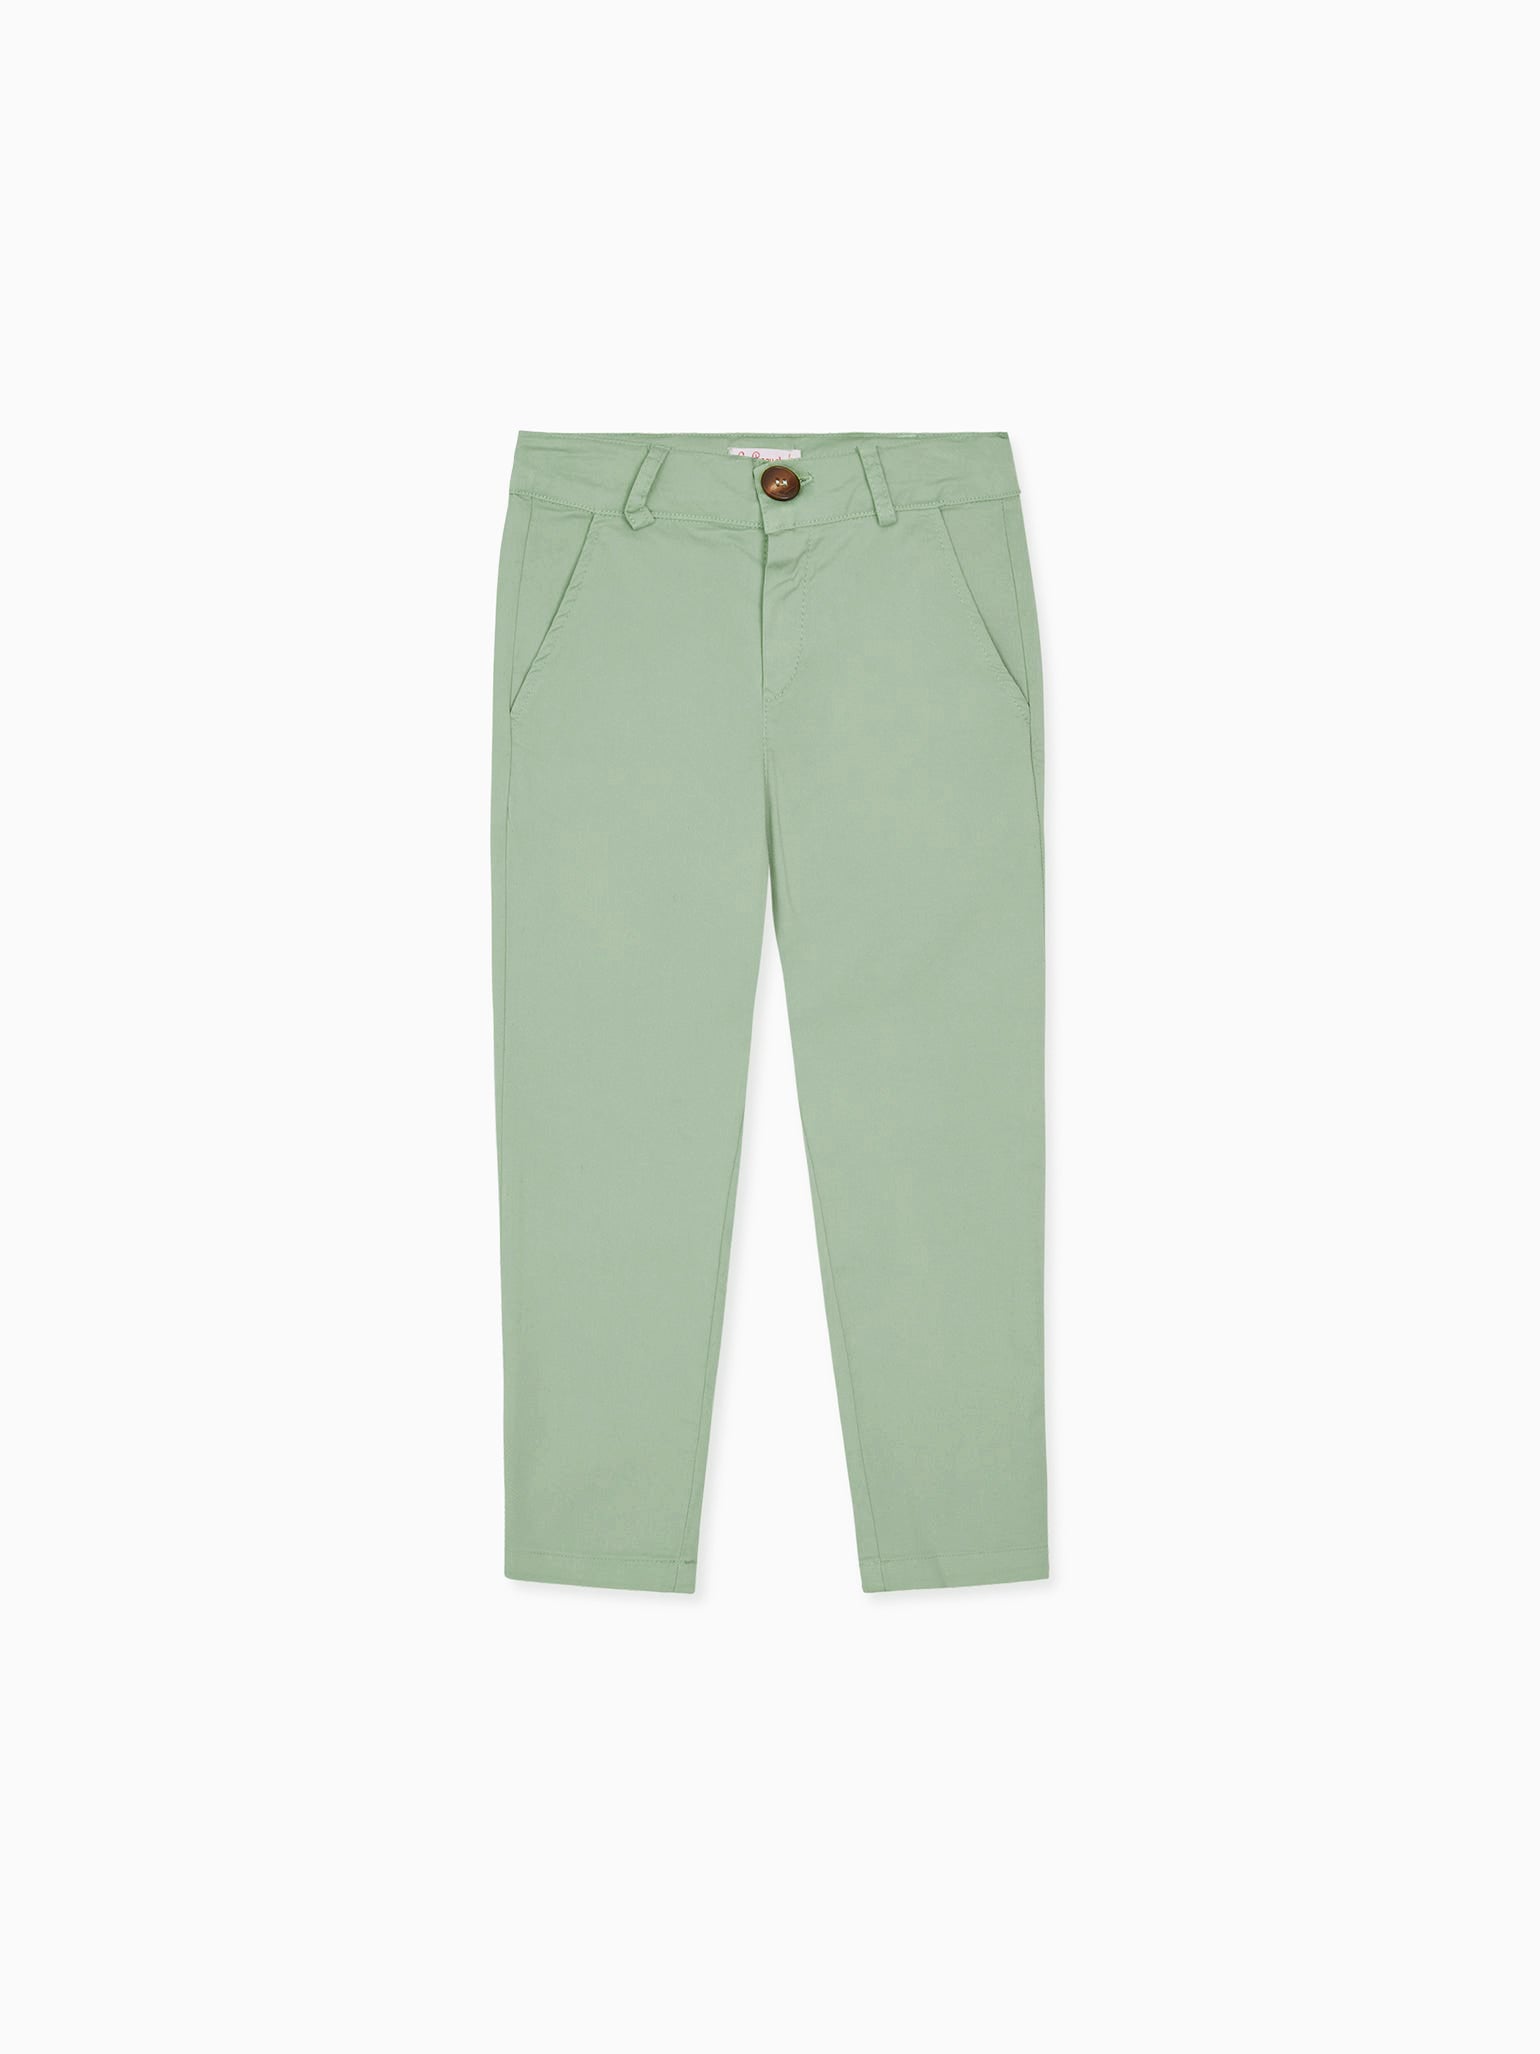 REPLAY & SONS Cargo Trousers Olive Green for boys | NICKIS.com